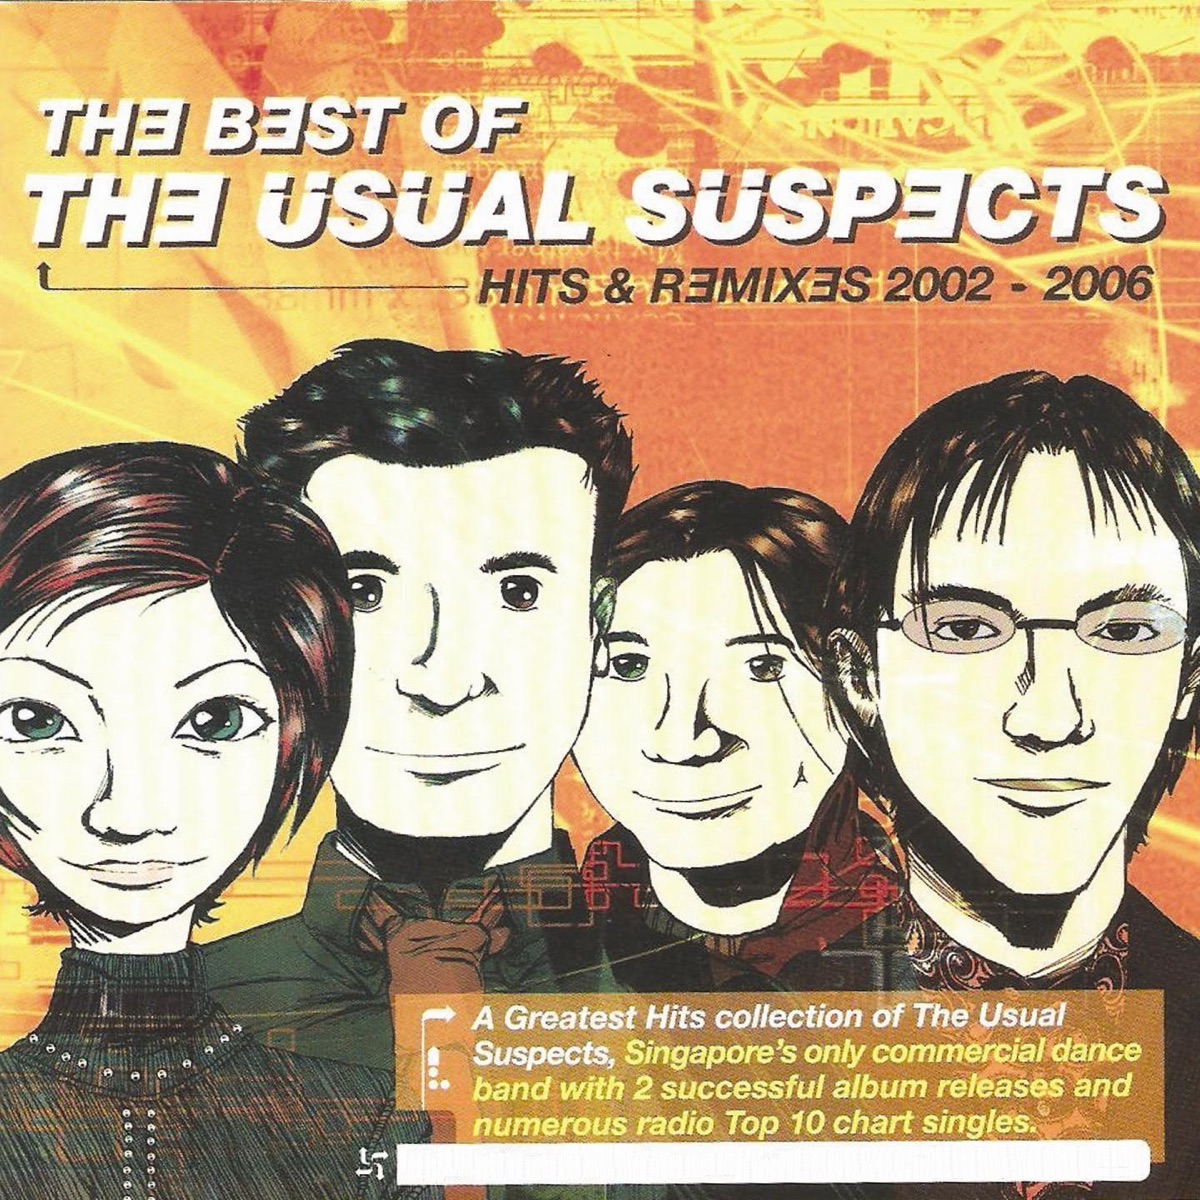 at ringe ekko øjenbryn The Usual Suspects: Best of (Hits & Remixes 2002-2006) by The Usual  Suspects on Apple Music